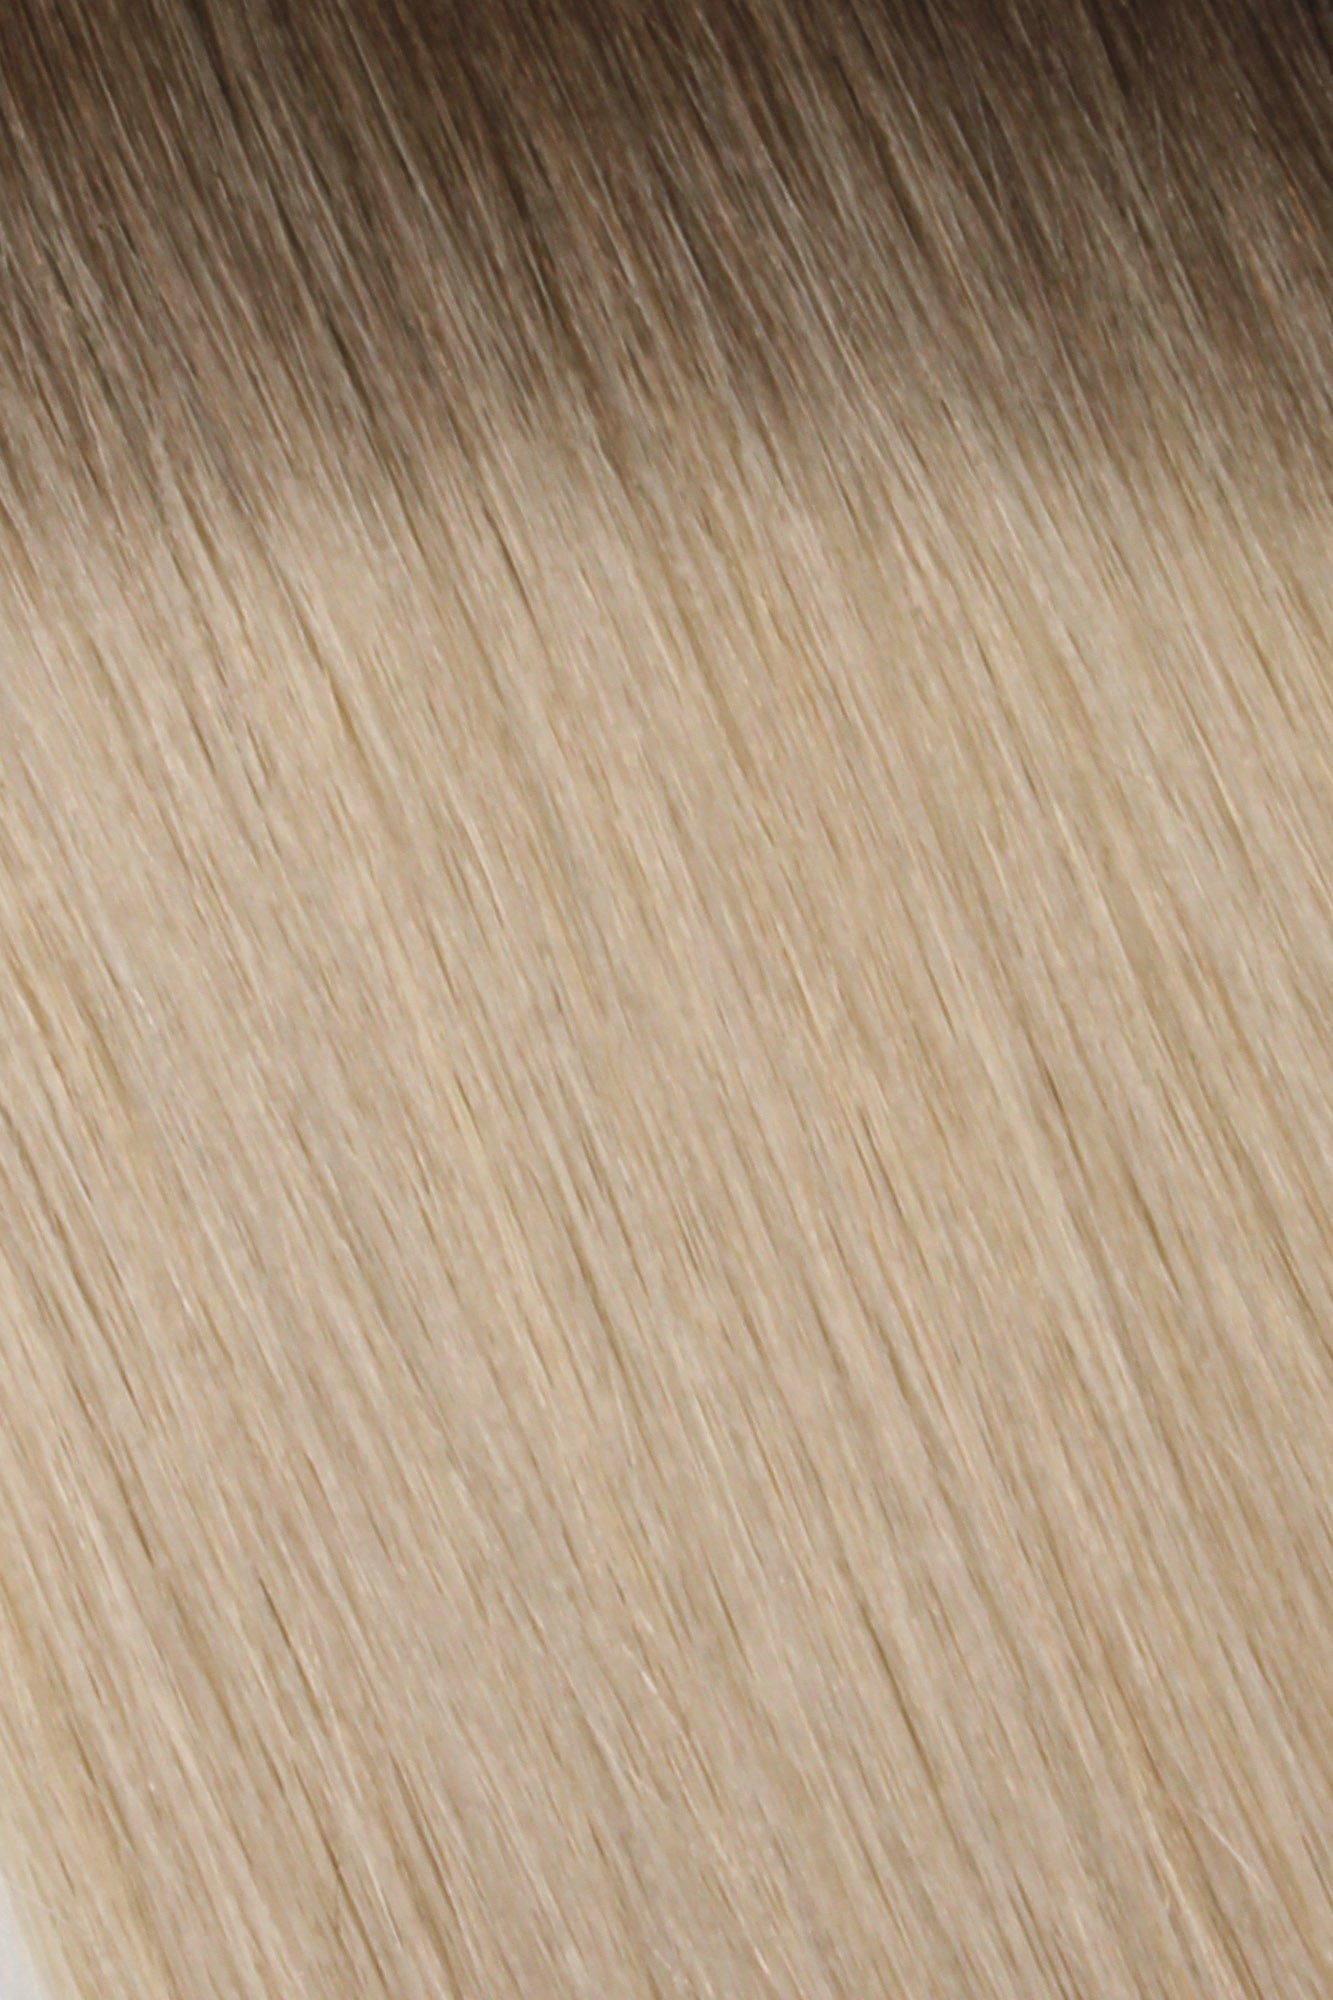 Tiny Tip Bonds 18&quot; -  SWAY Hair Extensions Rooted-Hollywood-Ash-Blonde: Lightweight, discreet. Made with Italian Keratin for comfort and long-lasting wear. Reusable and compatible with other SWAY Salon Professional Methods